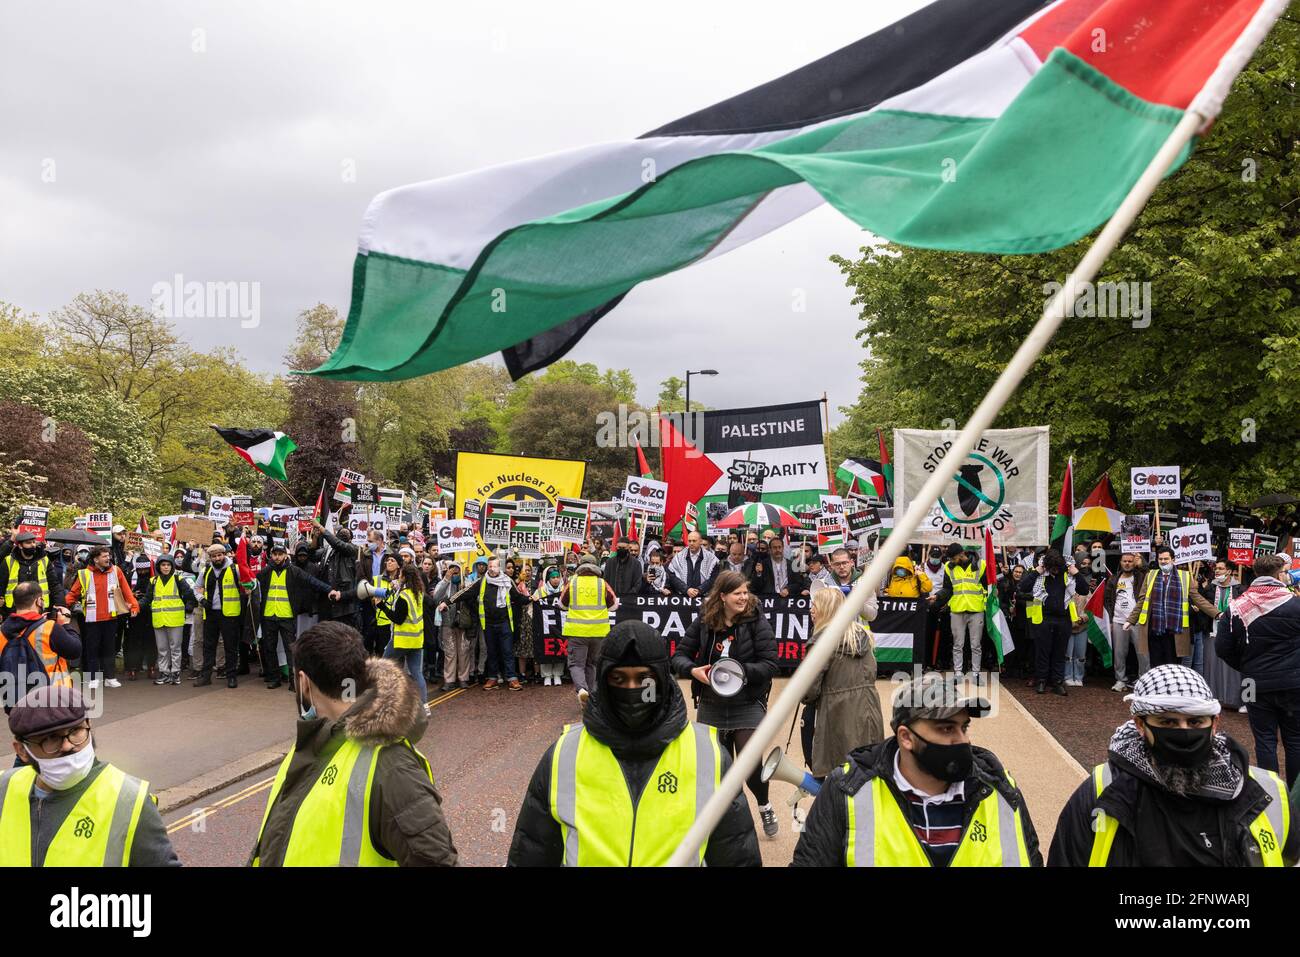 Palestinian flag waved above marching crowd, 'Free Palestine' solidarity protest, London, 15 May 2021 Stock Photo